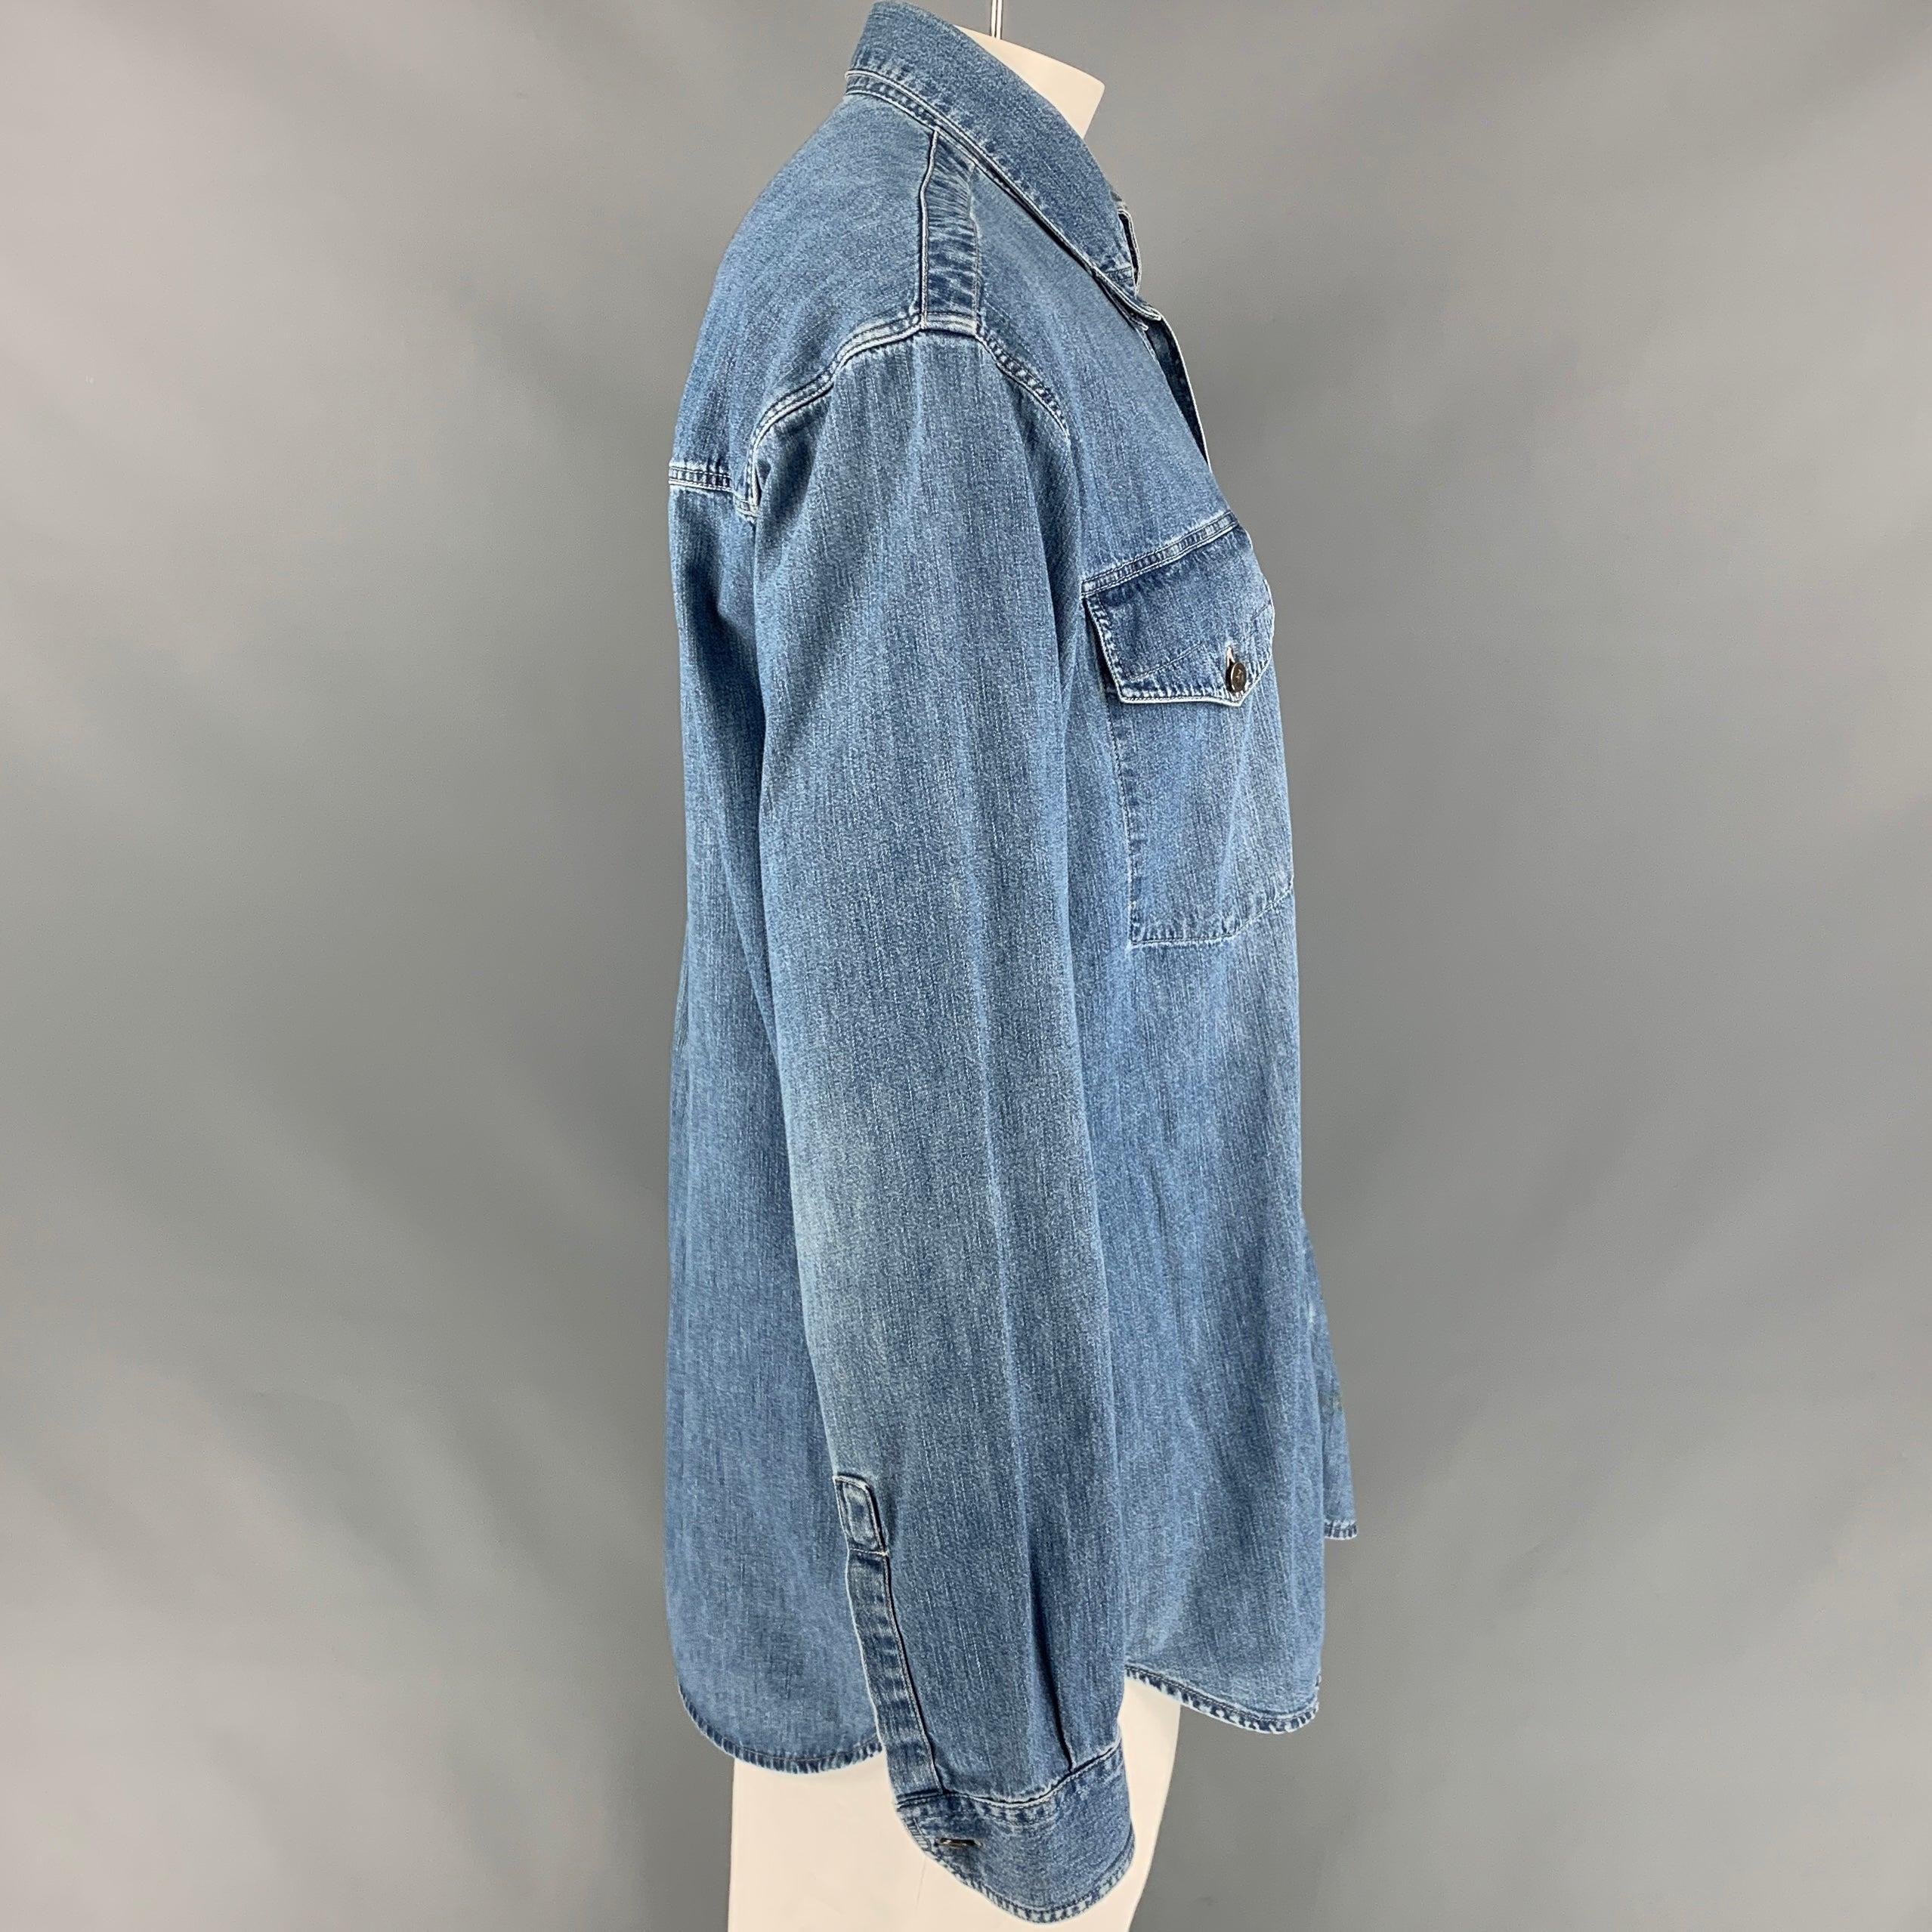 Vintage VERSACE JEANS COUTURE long sleeve shirt comes in a blue wash denim featuring contrast stitching, medusa head buttons, pointed collar, and a button up closure. Made in Italy.
Good
Pre-Owned Condition. Minor marks at front.  

Marked:   XL